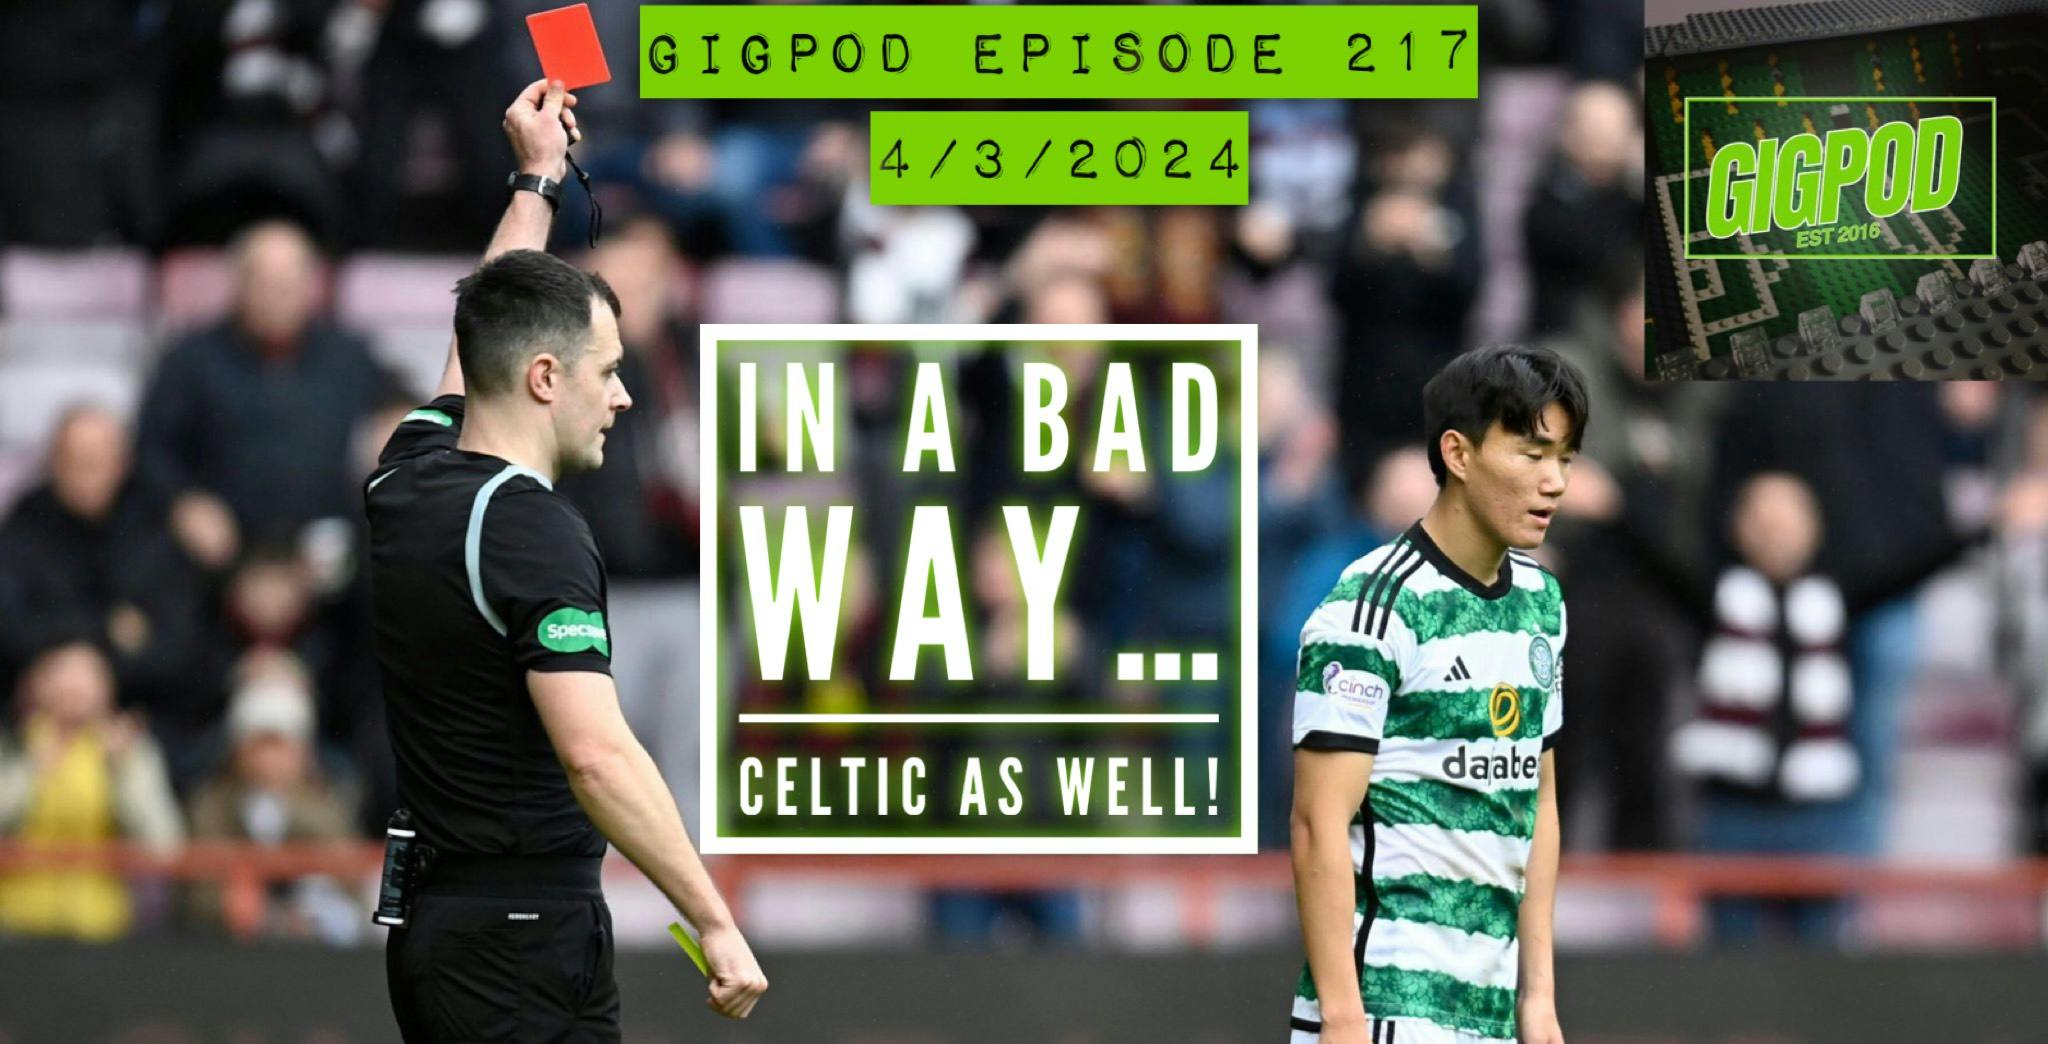 GIGPOD EP 217: IN A BAD WAY.......CELTIC AS WELL!